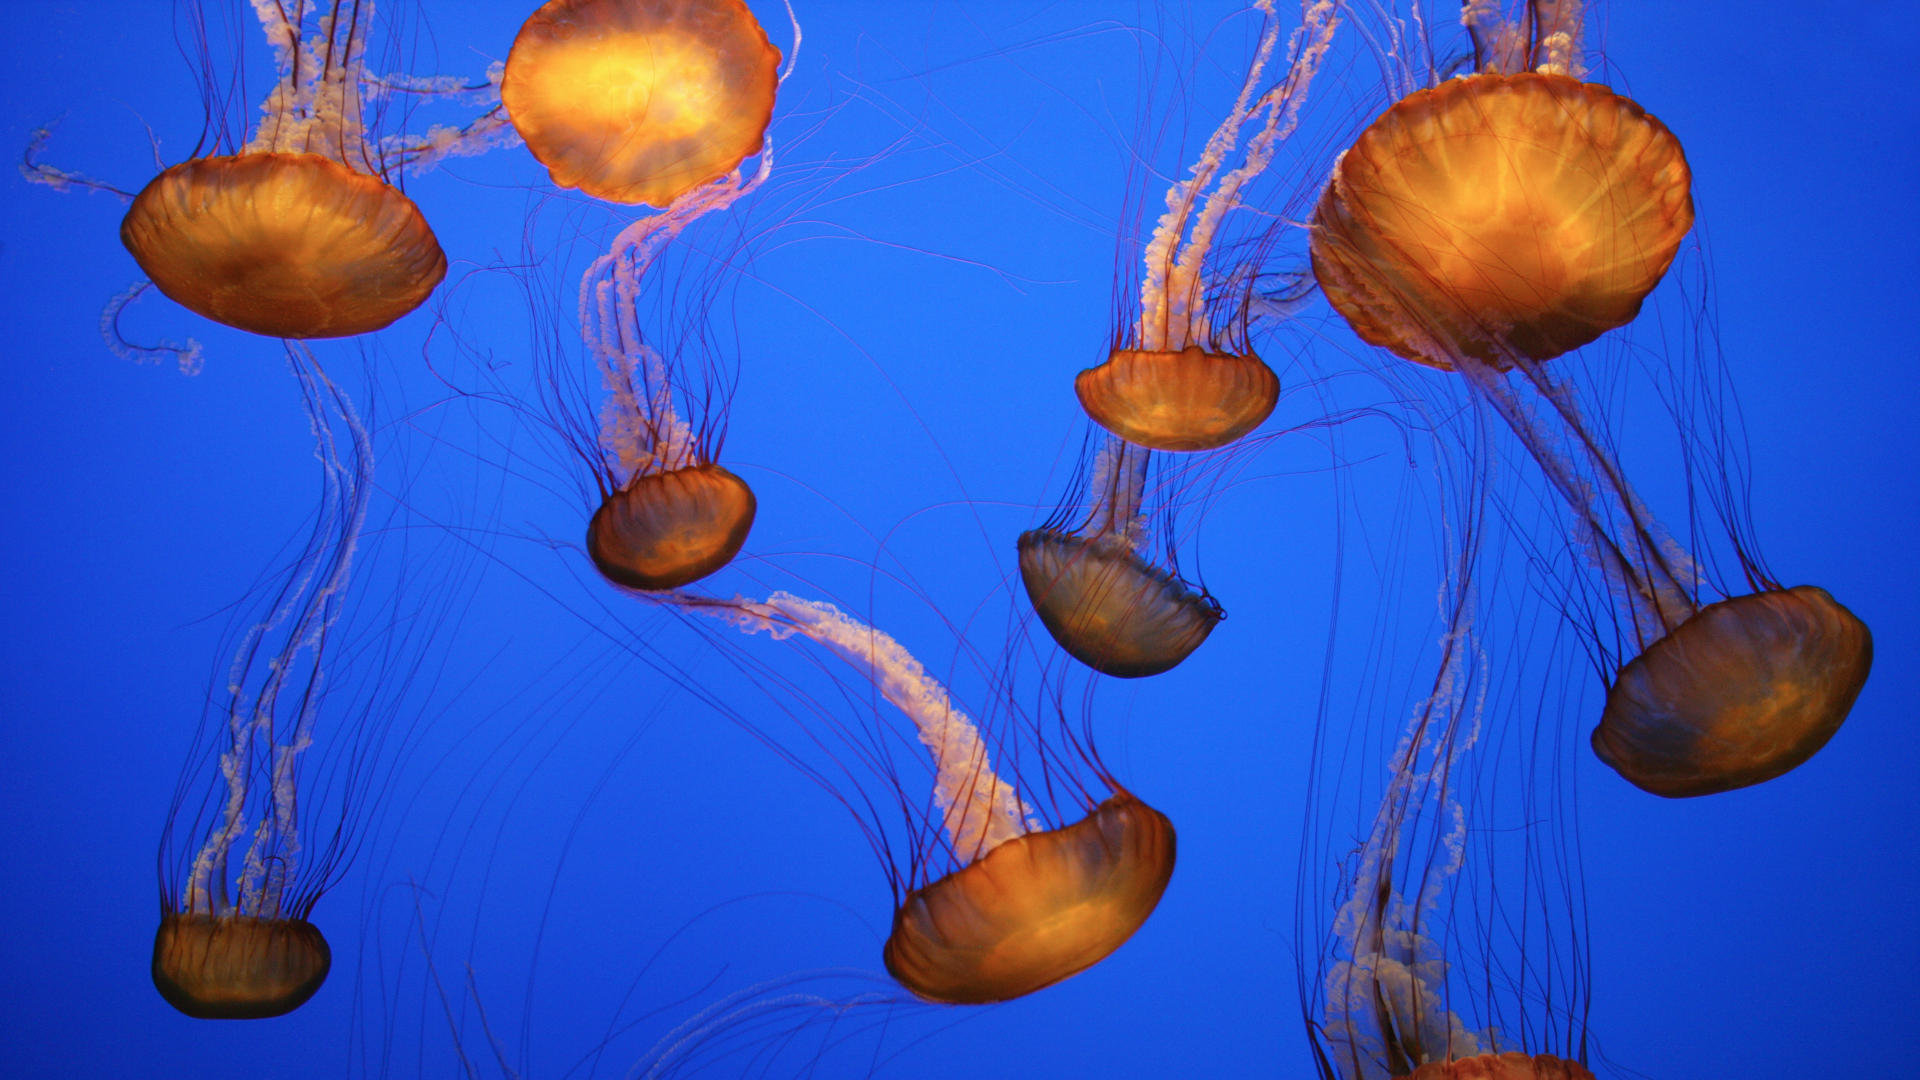 Download full hd 1920x1080 Jellyfish PC background ID:199798 for free